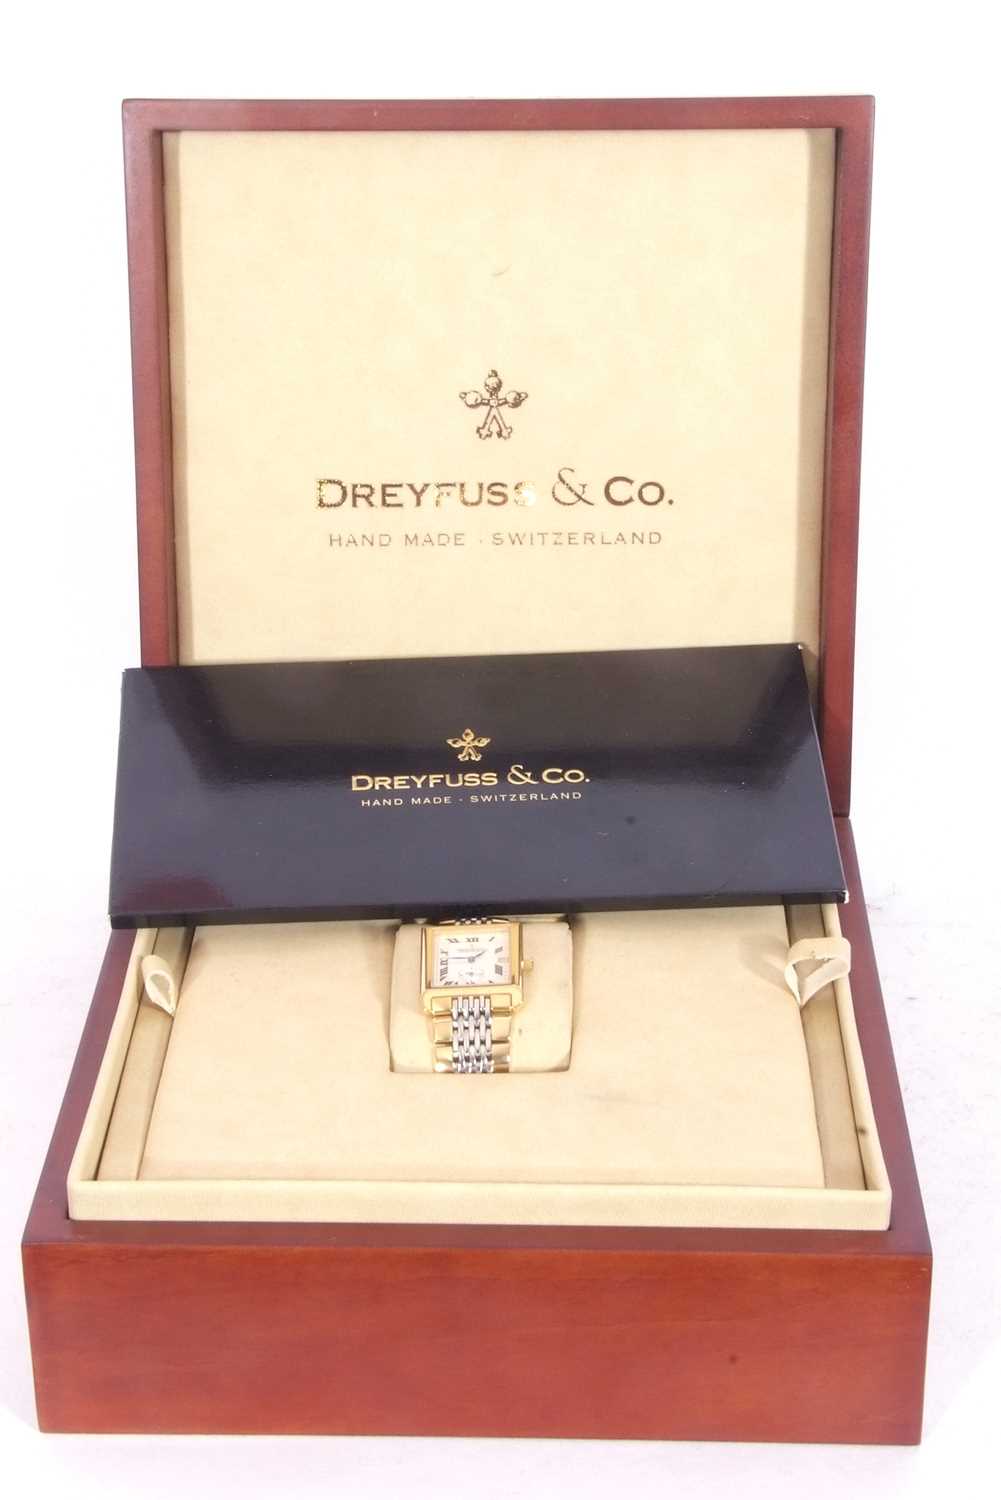 Dreyfuss & Co gent's wrist watch, ref no 1974, date function window, the case gold plated, and a - Image 4 of 10